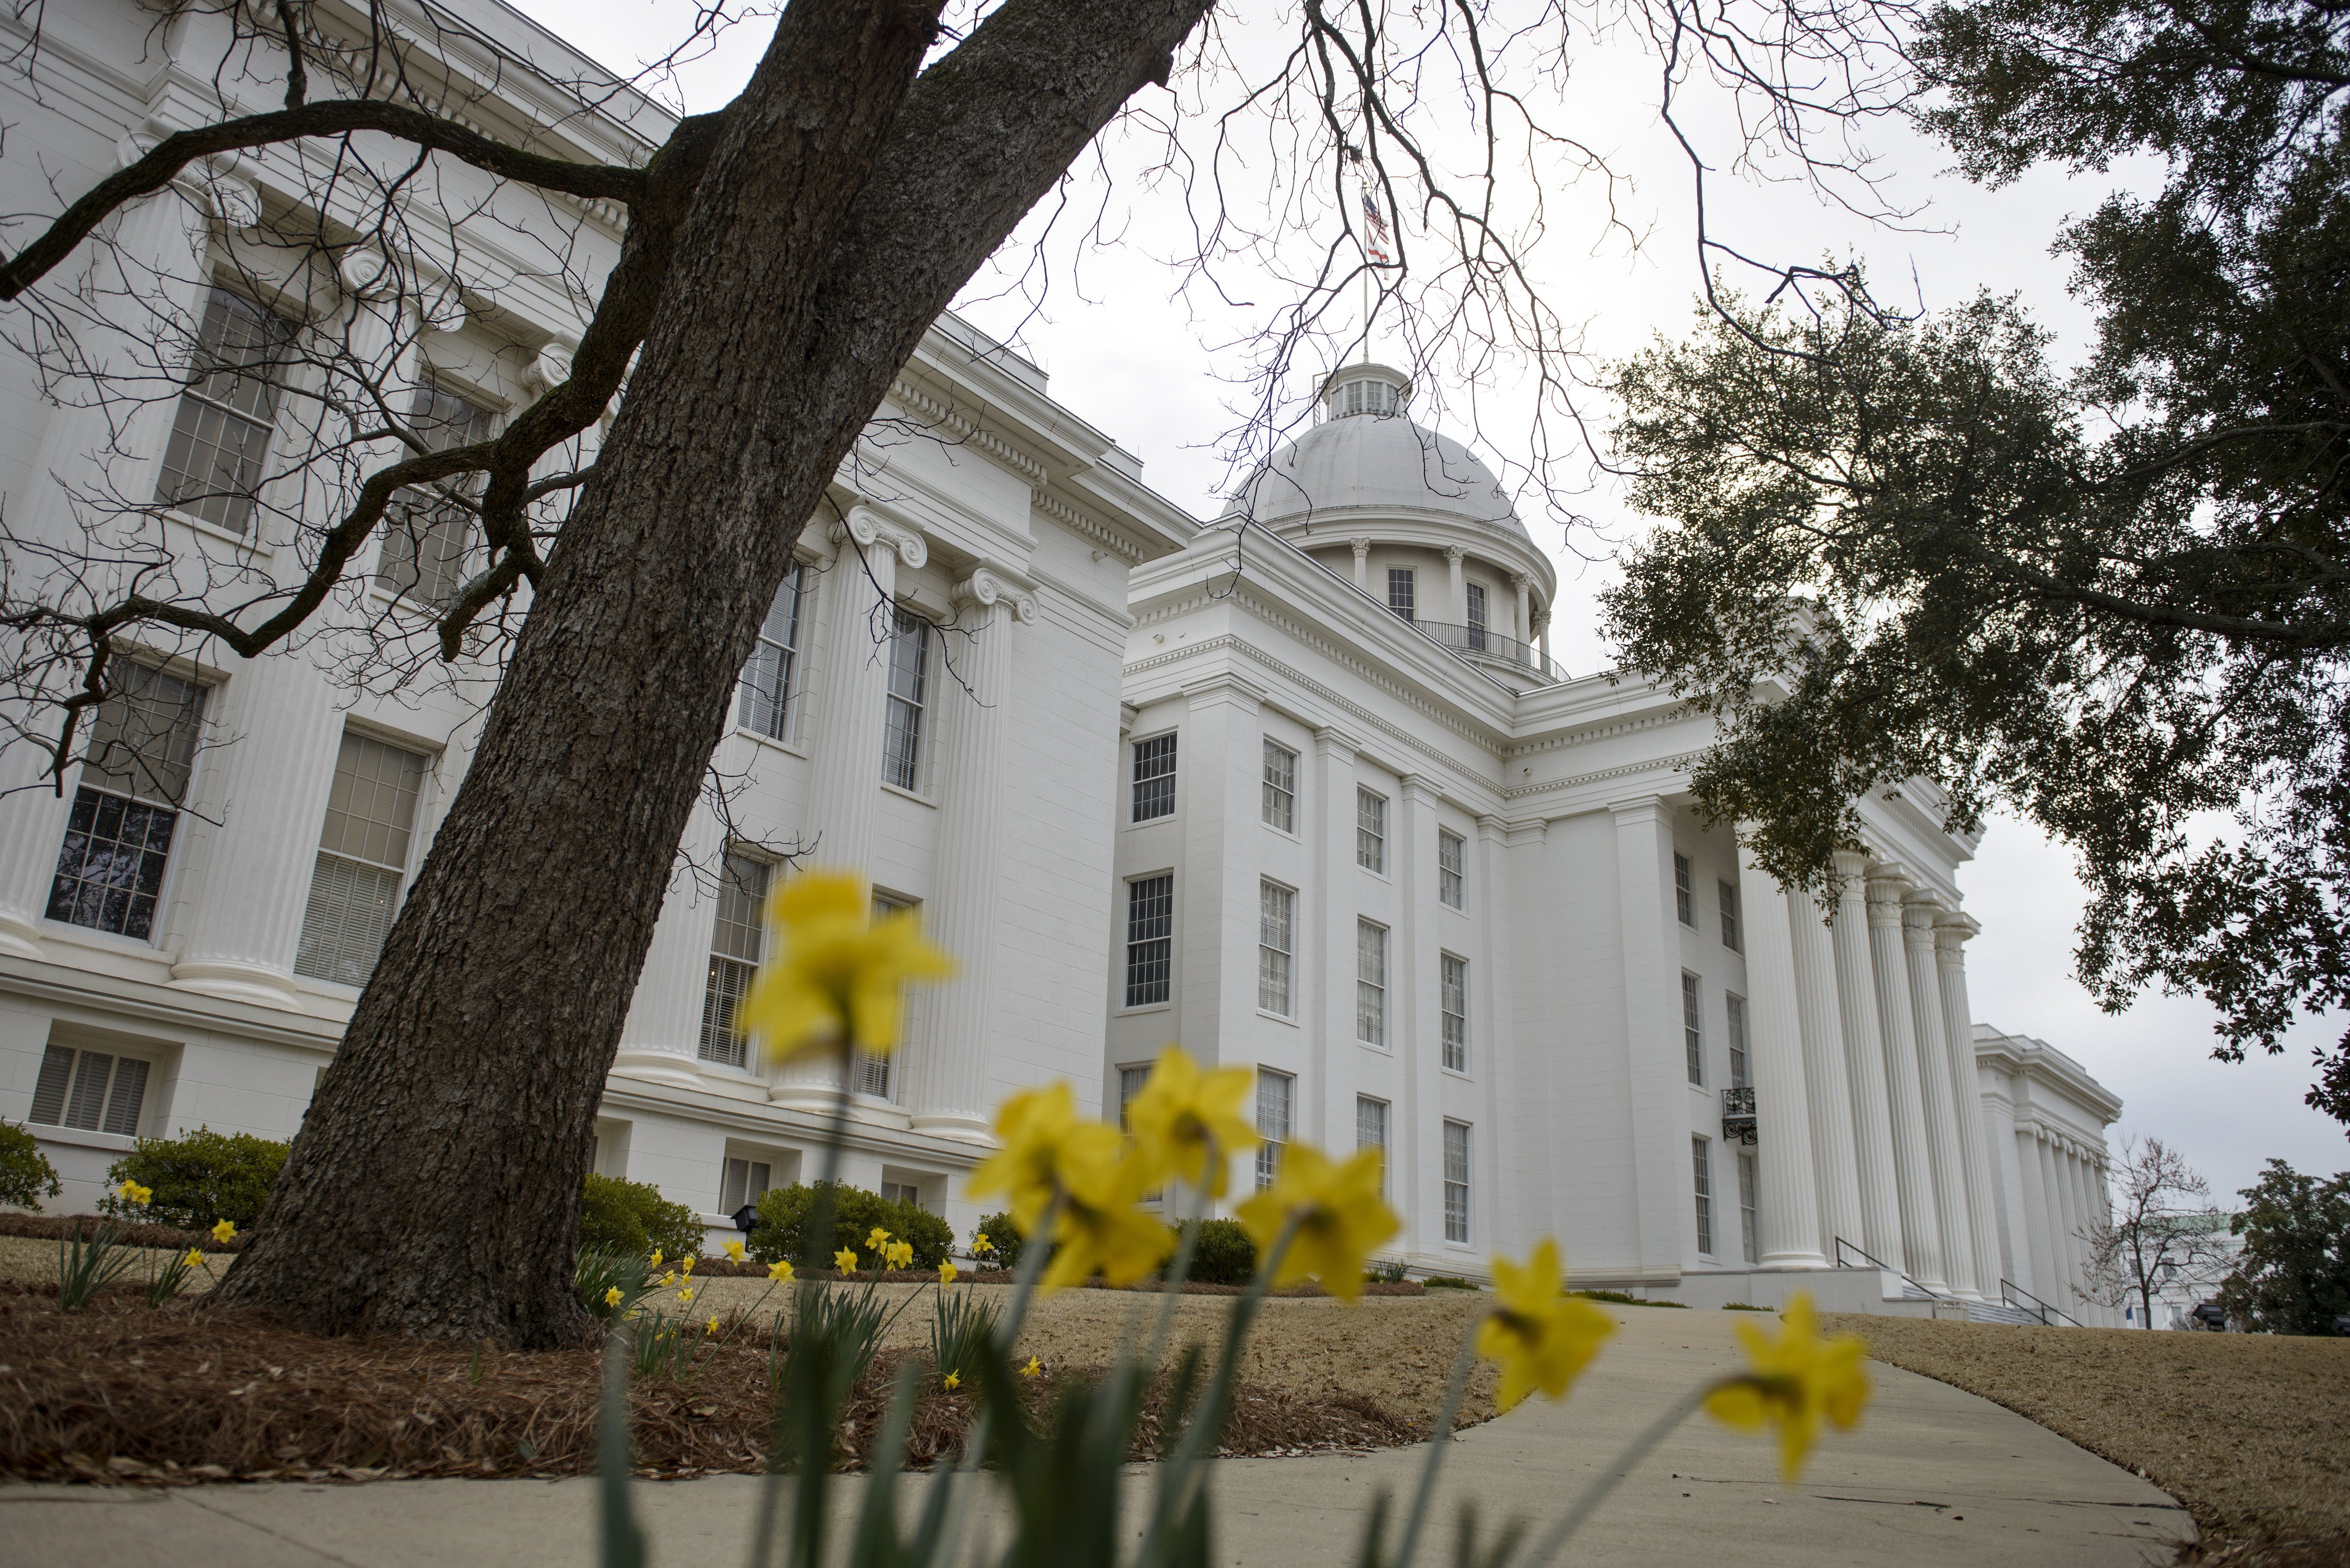 A view of the state capitol on March 6, 2015 in Montgomery, Alabama. (Brendan Smialowski&mdash;AFP/Getty Images)